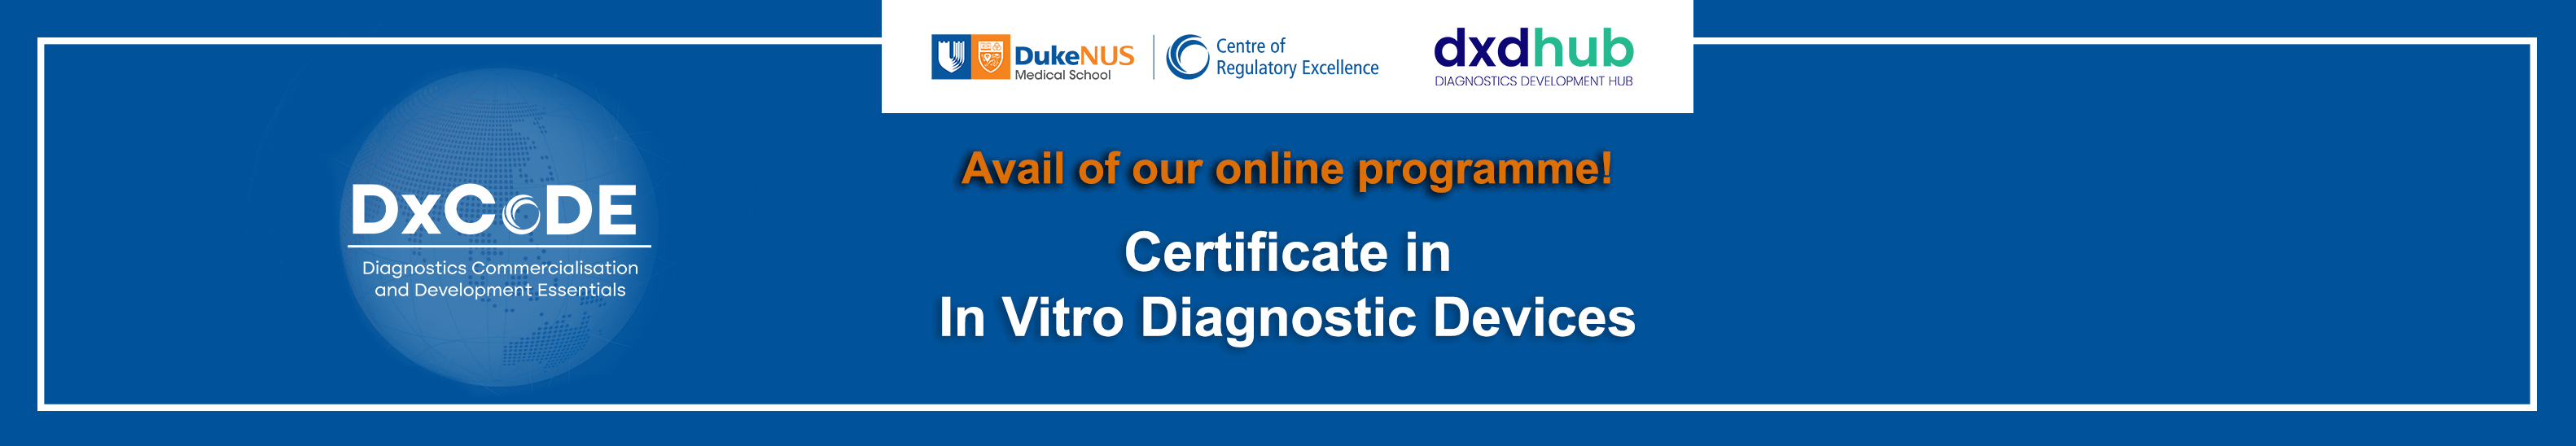 Certificate in IVD banner